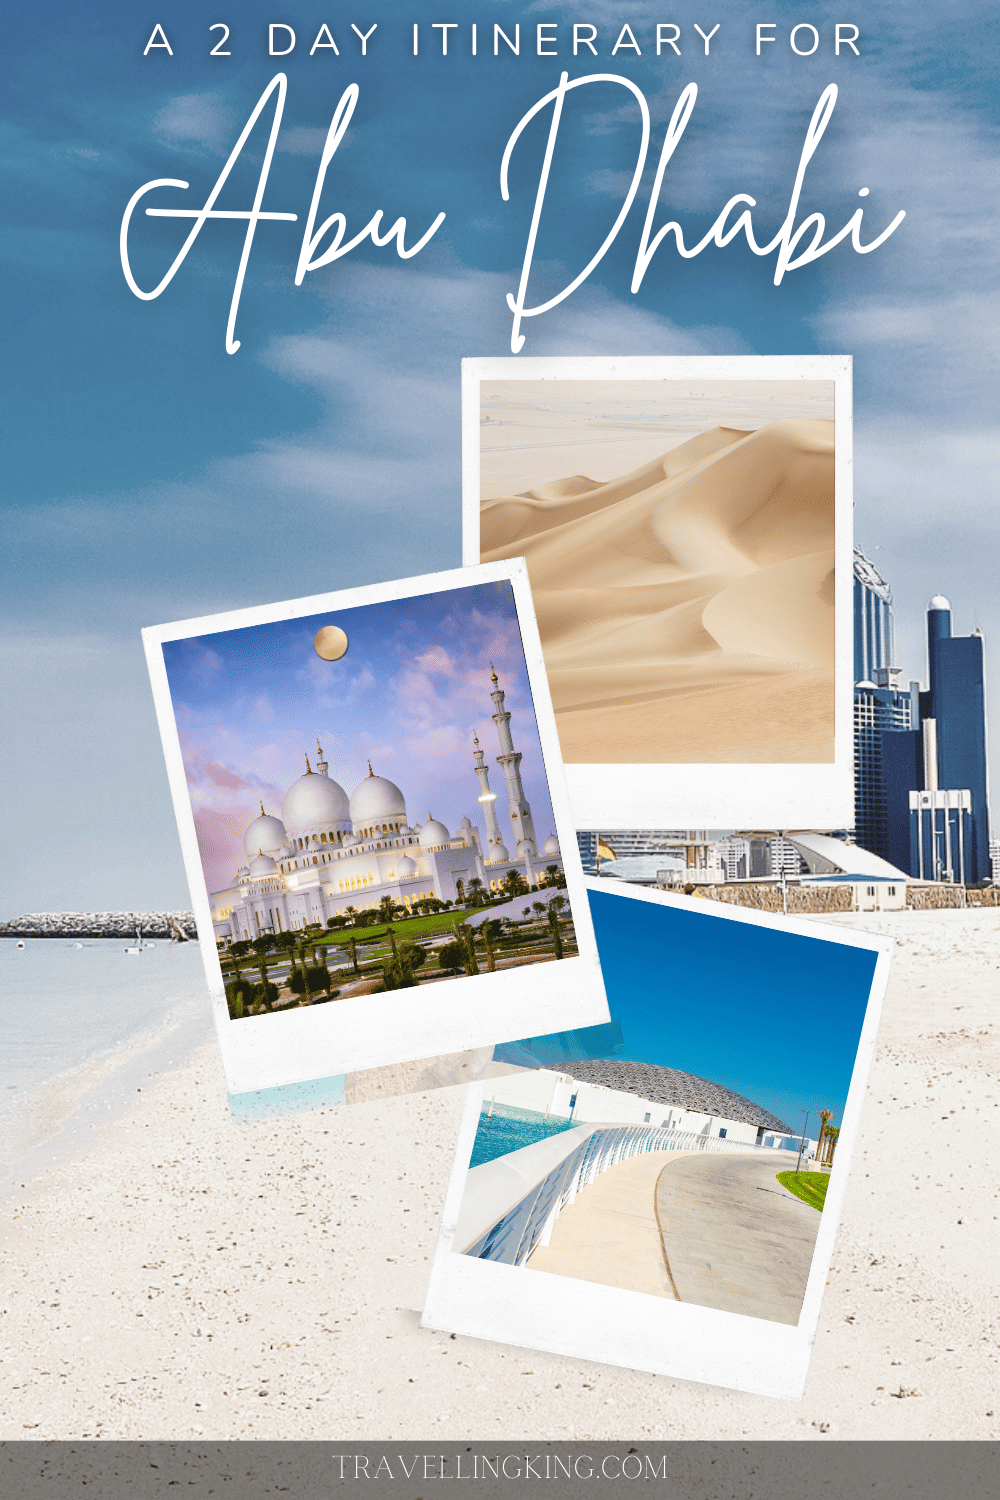 48 hours in Abu Dhabi - A 2 day Itinerary